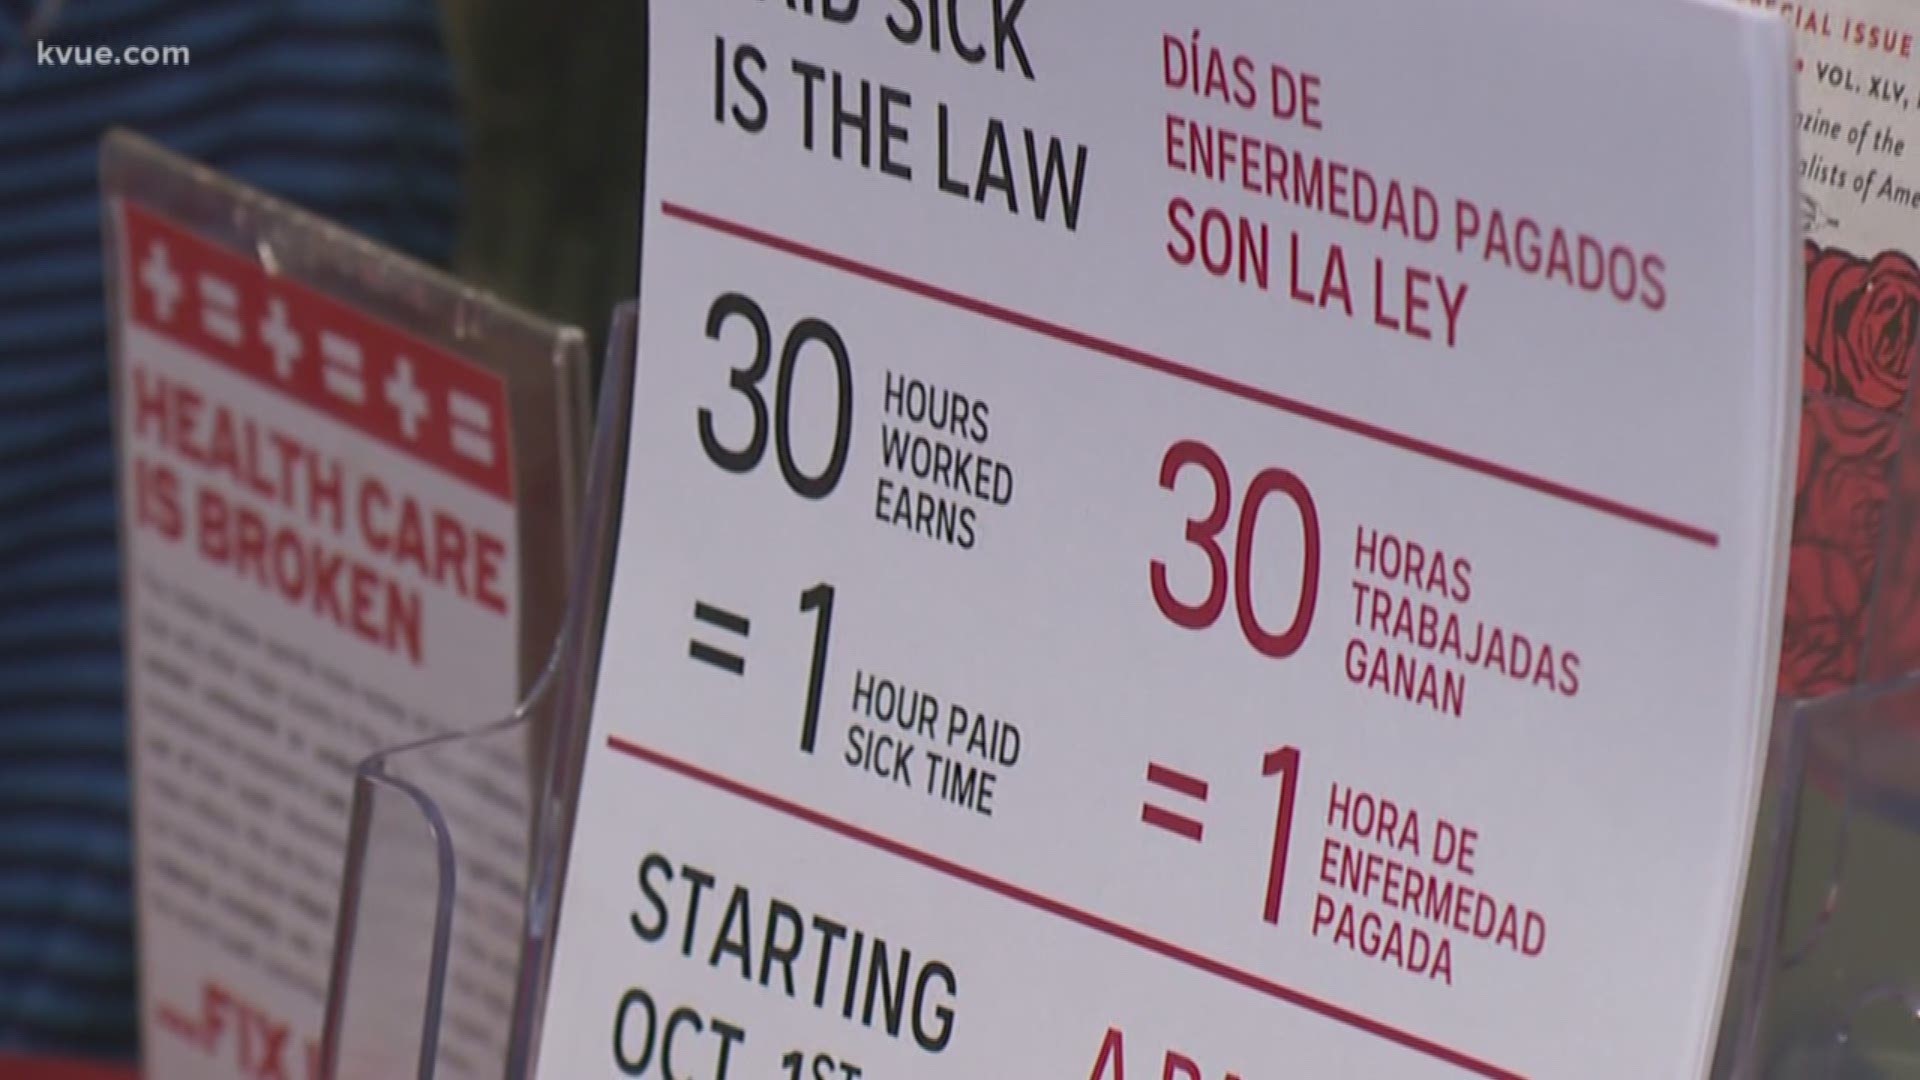 It's been an uphill battle for those in favor of Austin's paid sick leave ordinance. The community came together Sunday to keep the conversation moving forward.